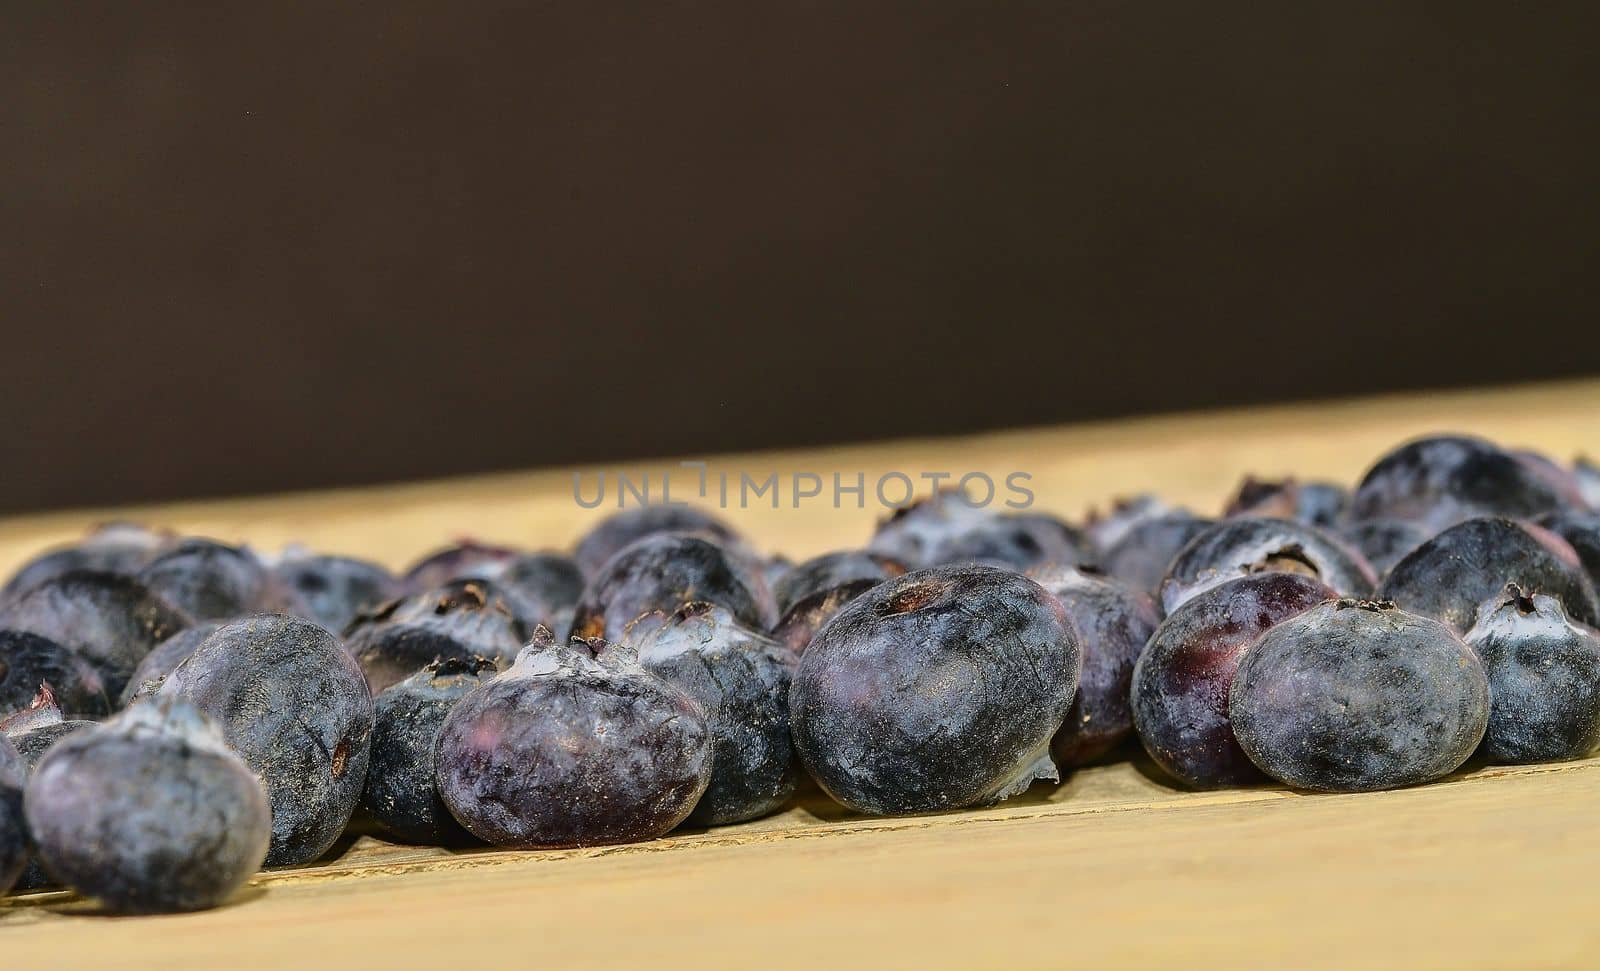 Blueberries  on white wooden background. Bilberries, blueberries, huckleberries, whortleberries. Black and white background. Black copy space